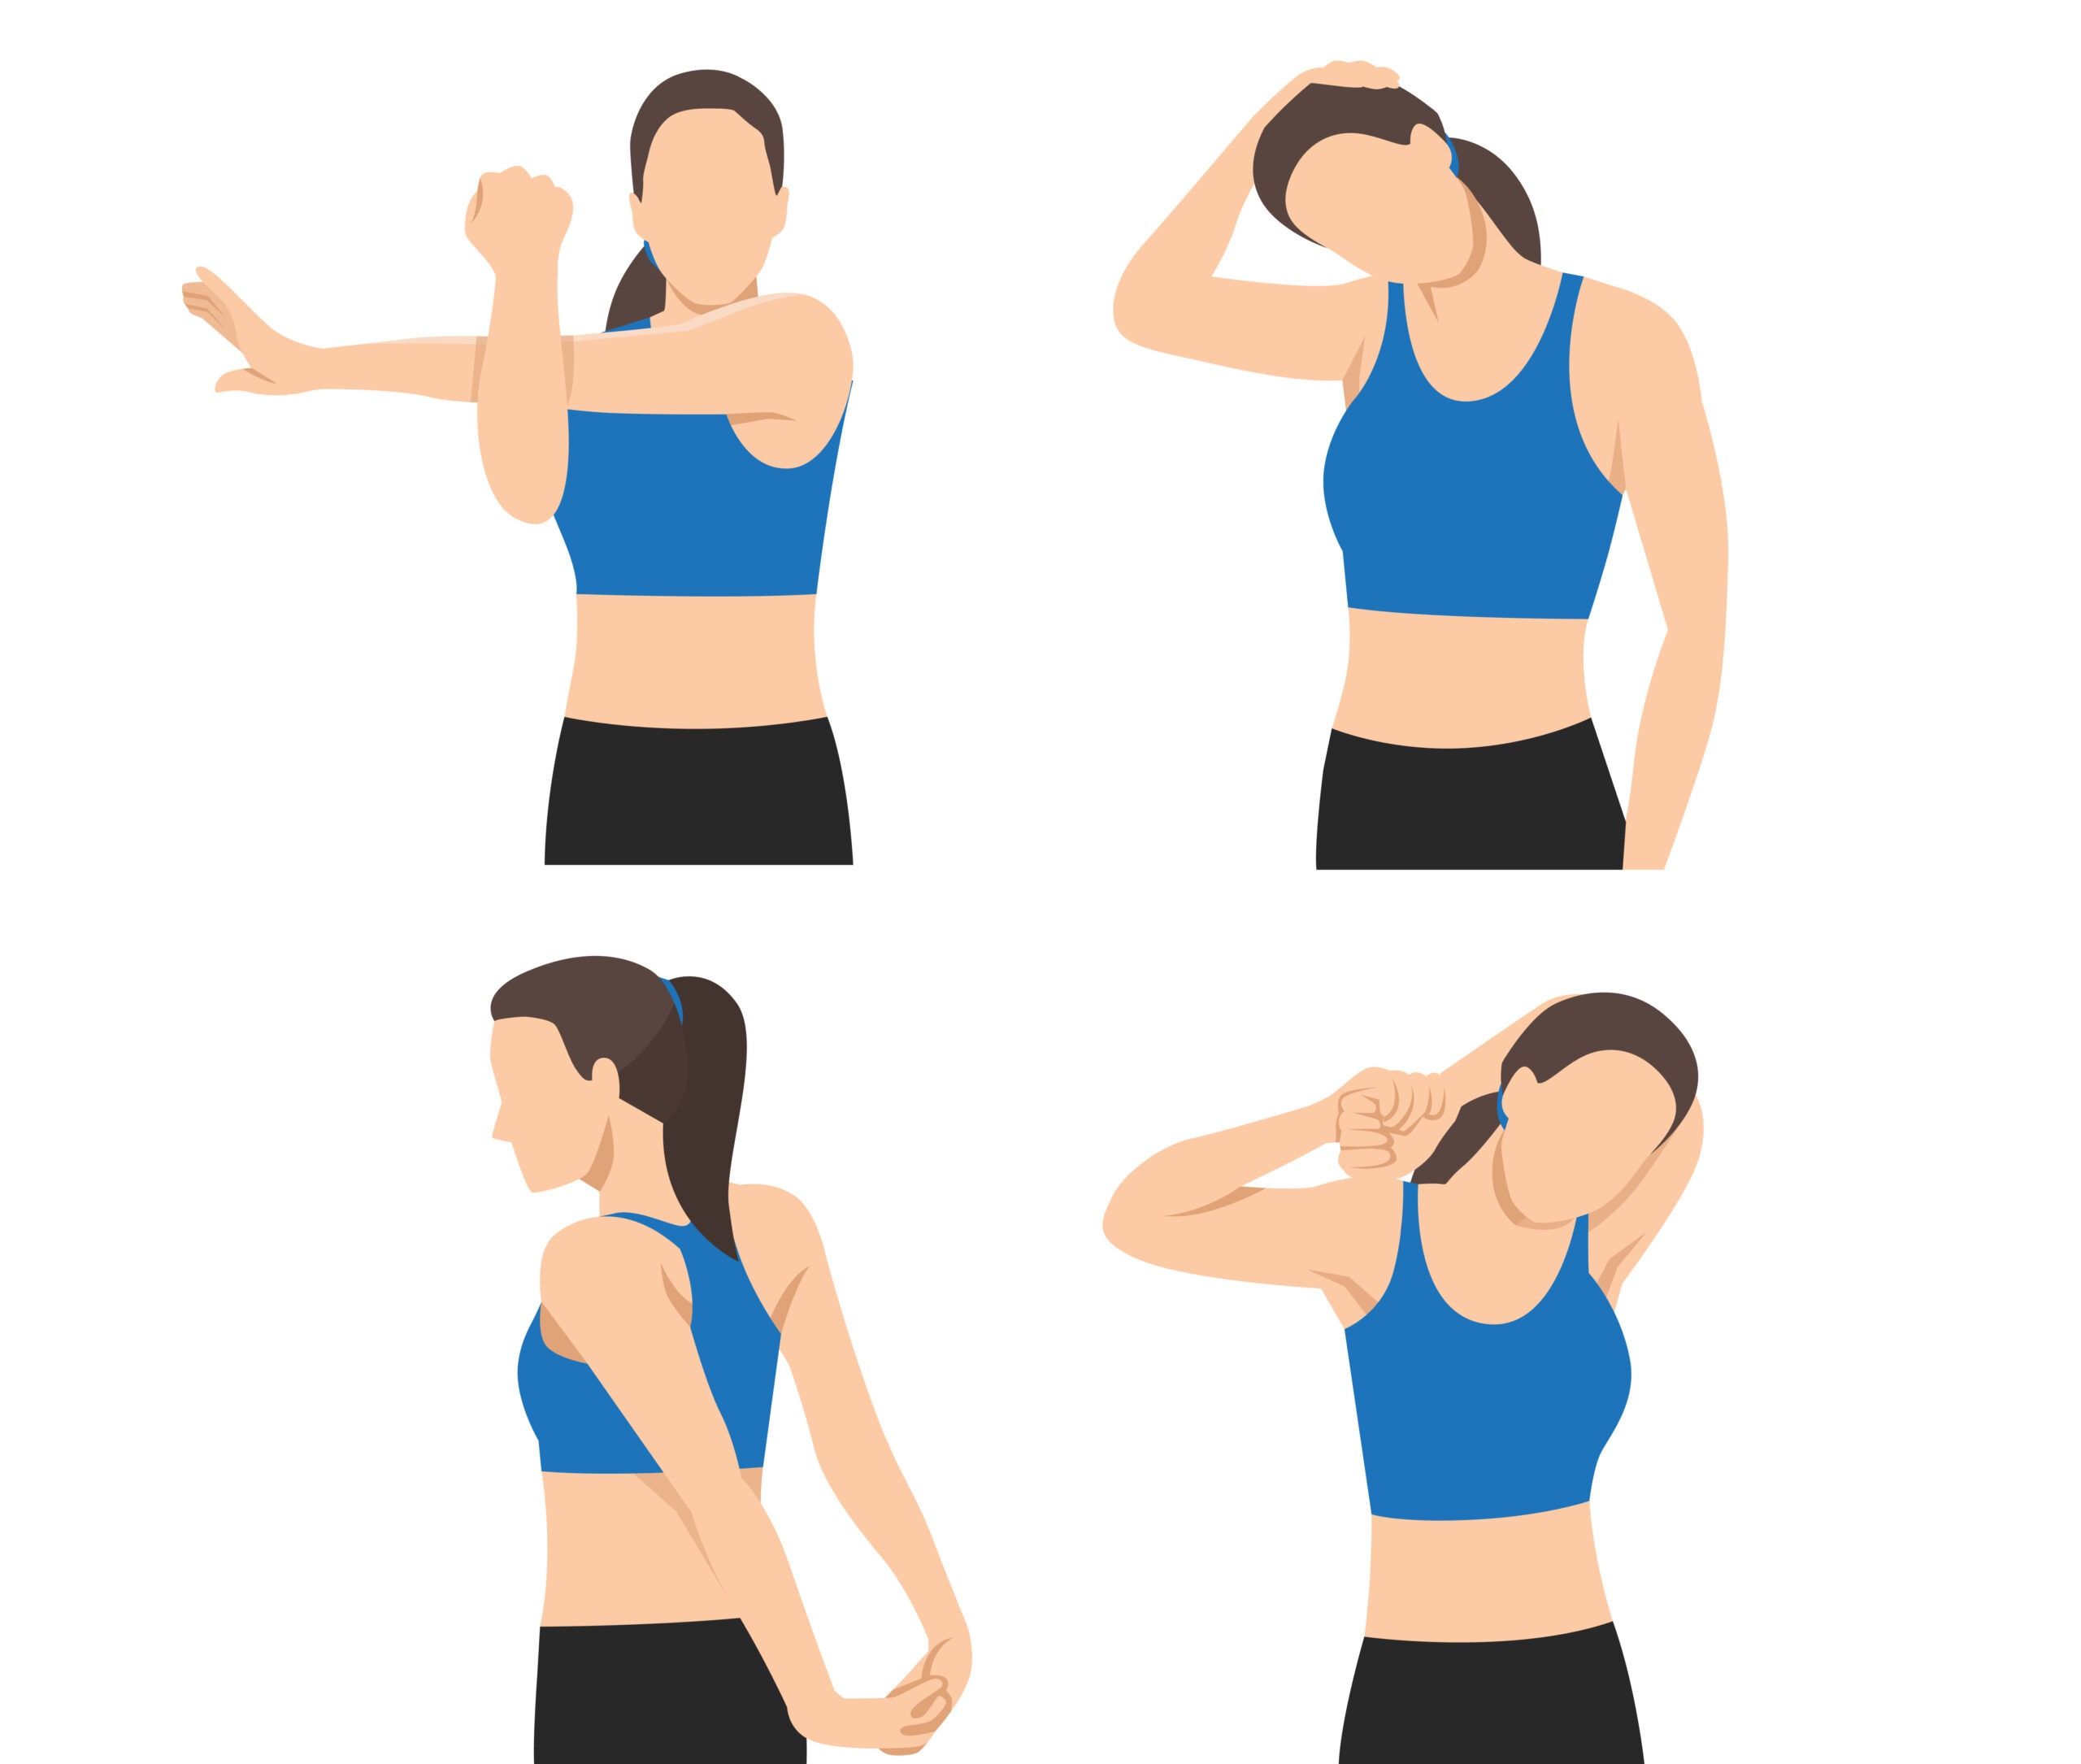 Woman stretching her neck, arms and shoulders. hand. Flat vector illustration isolated on white background